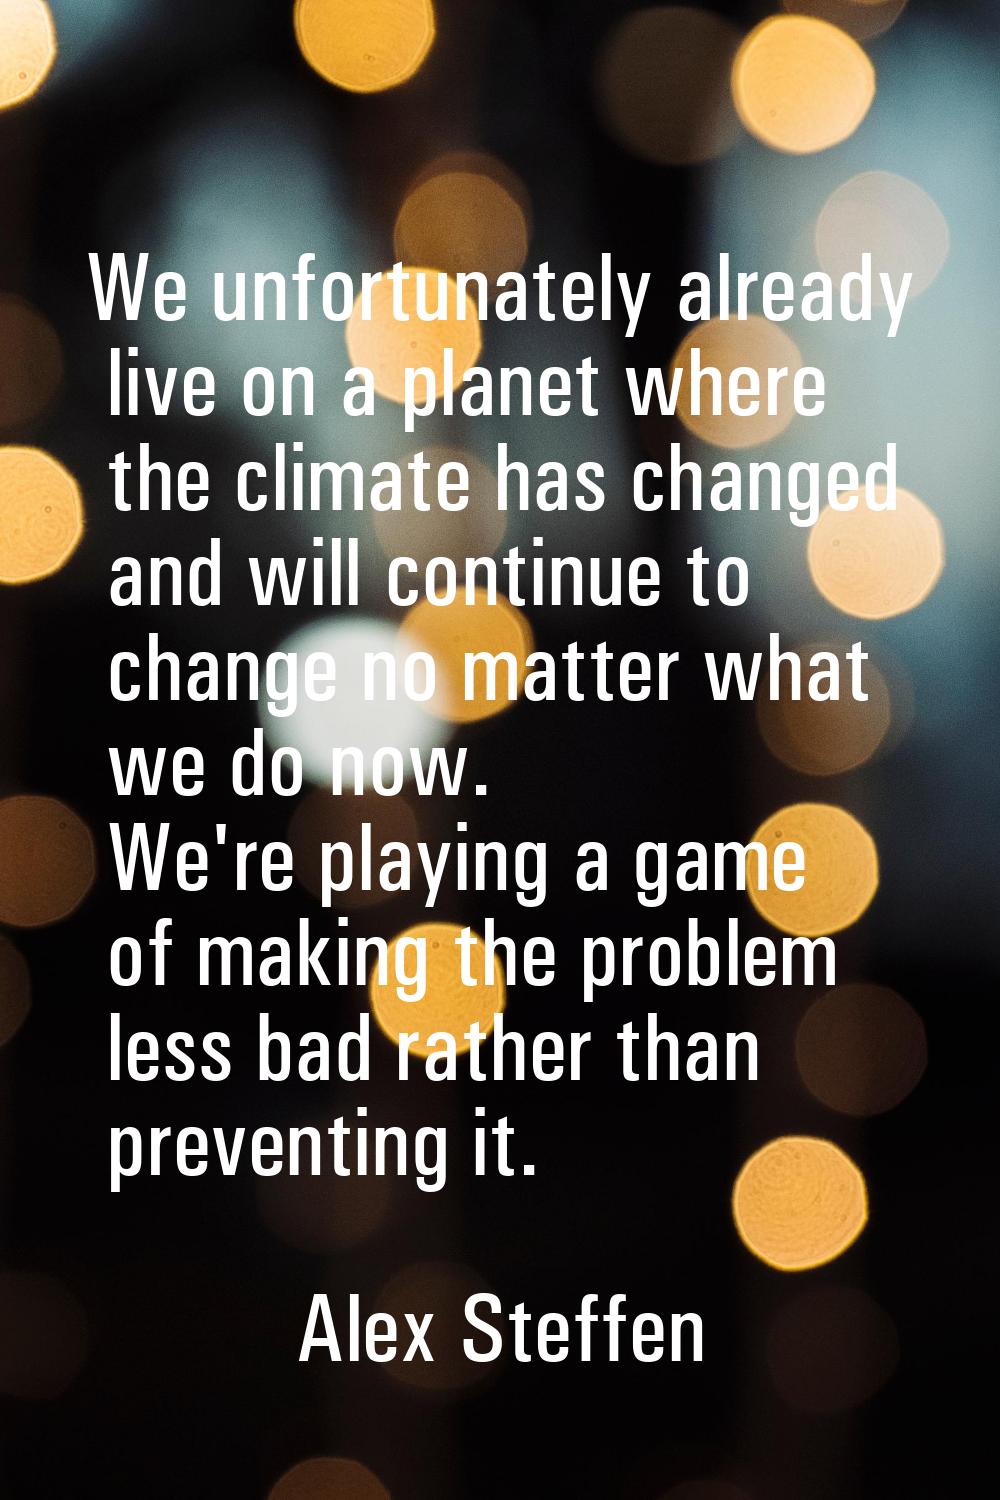 We unfortunately already live on a planet where the climate has changed and will continue to change